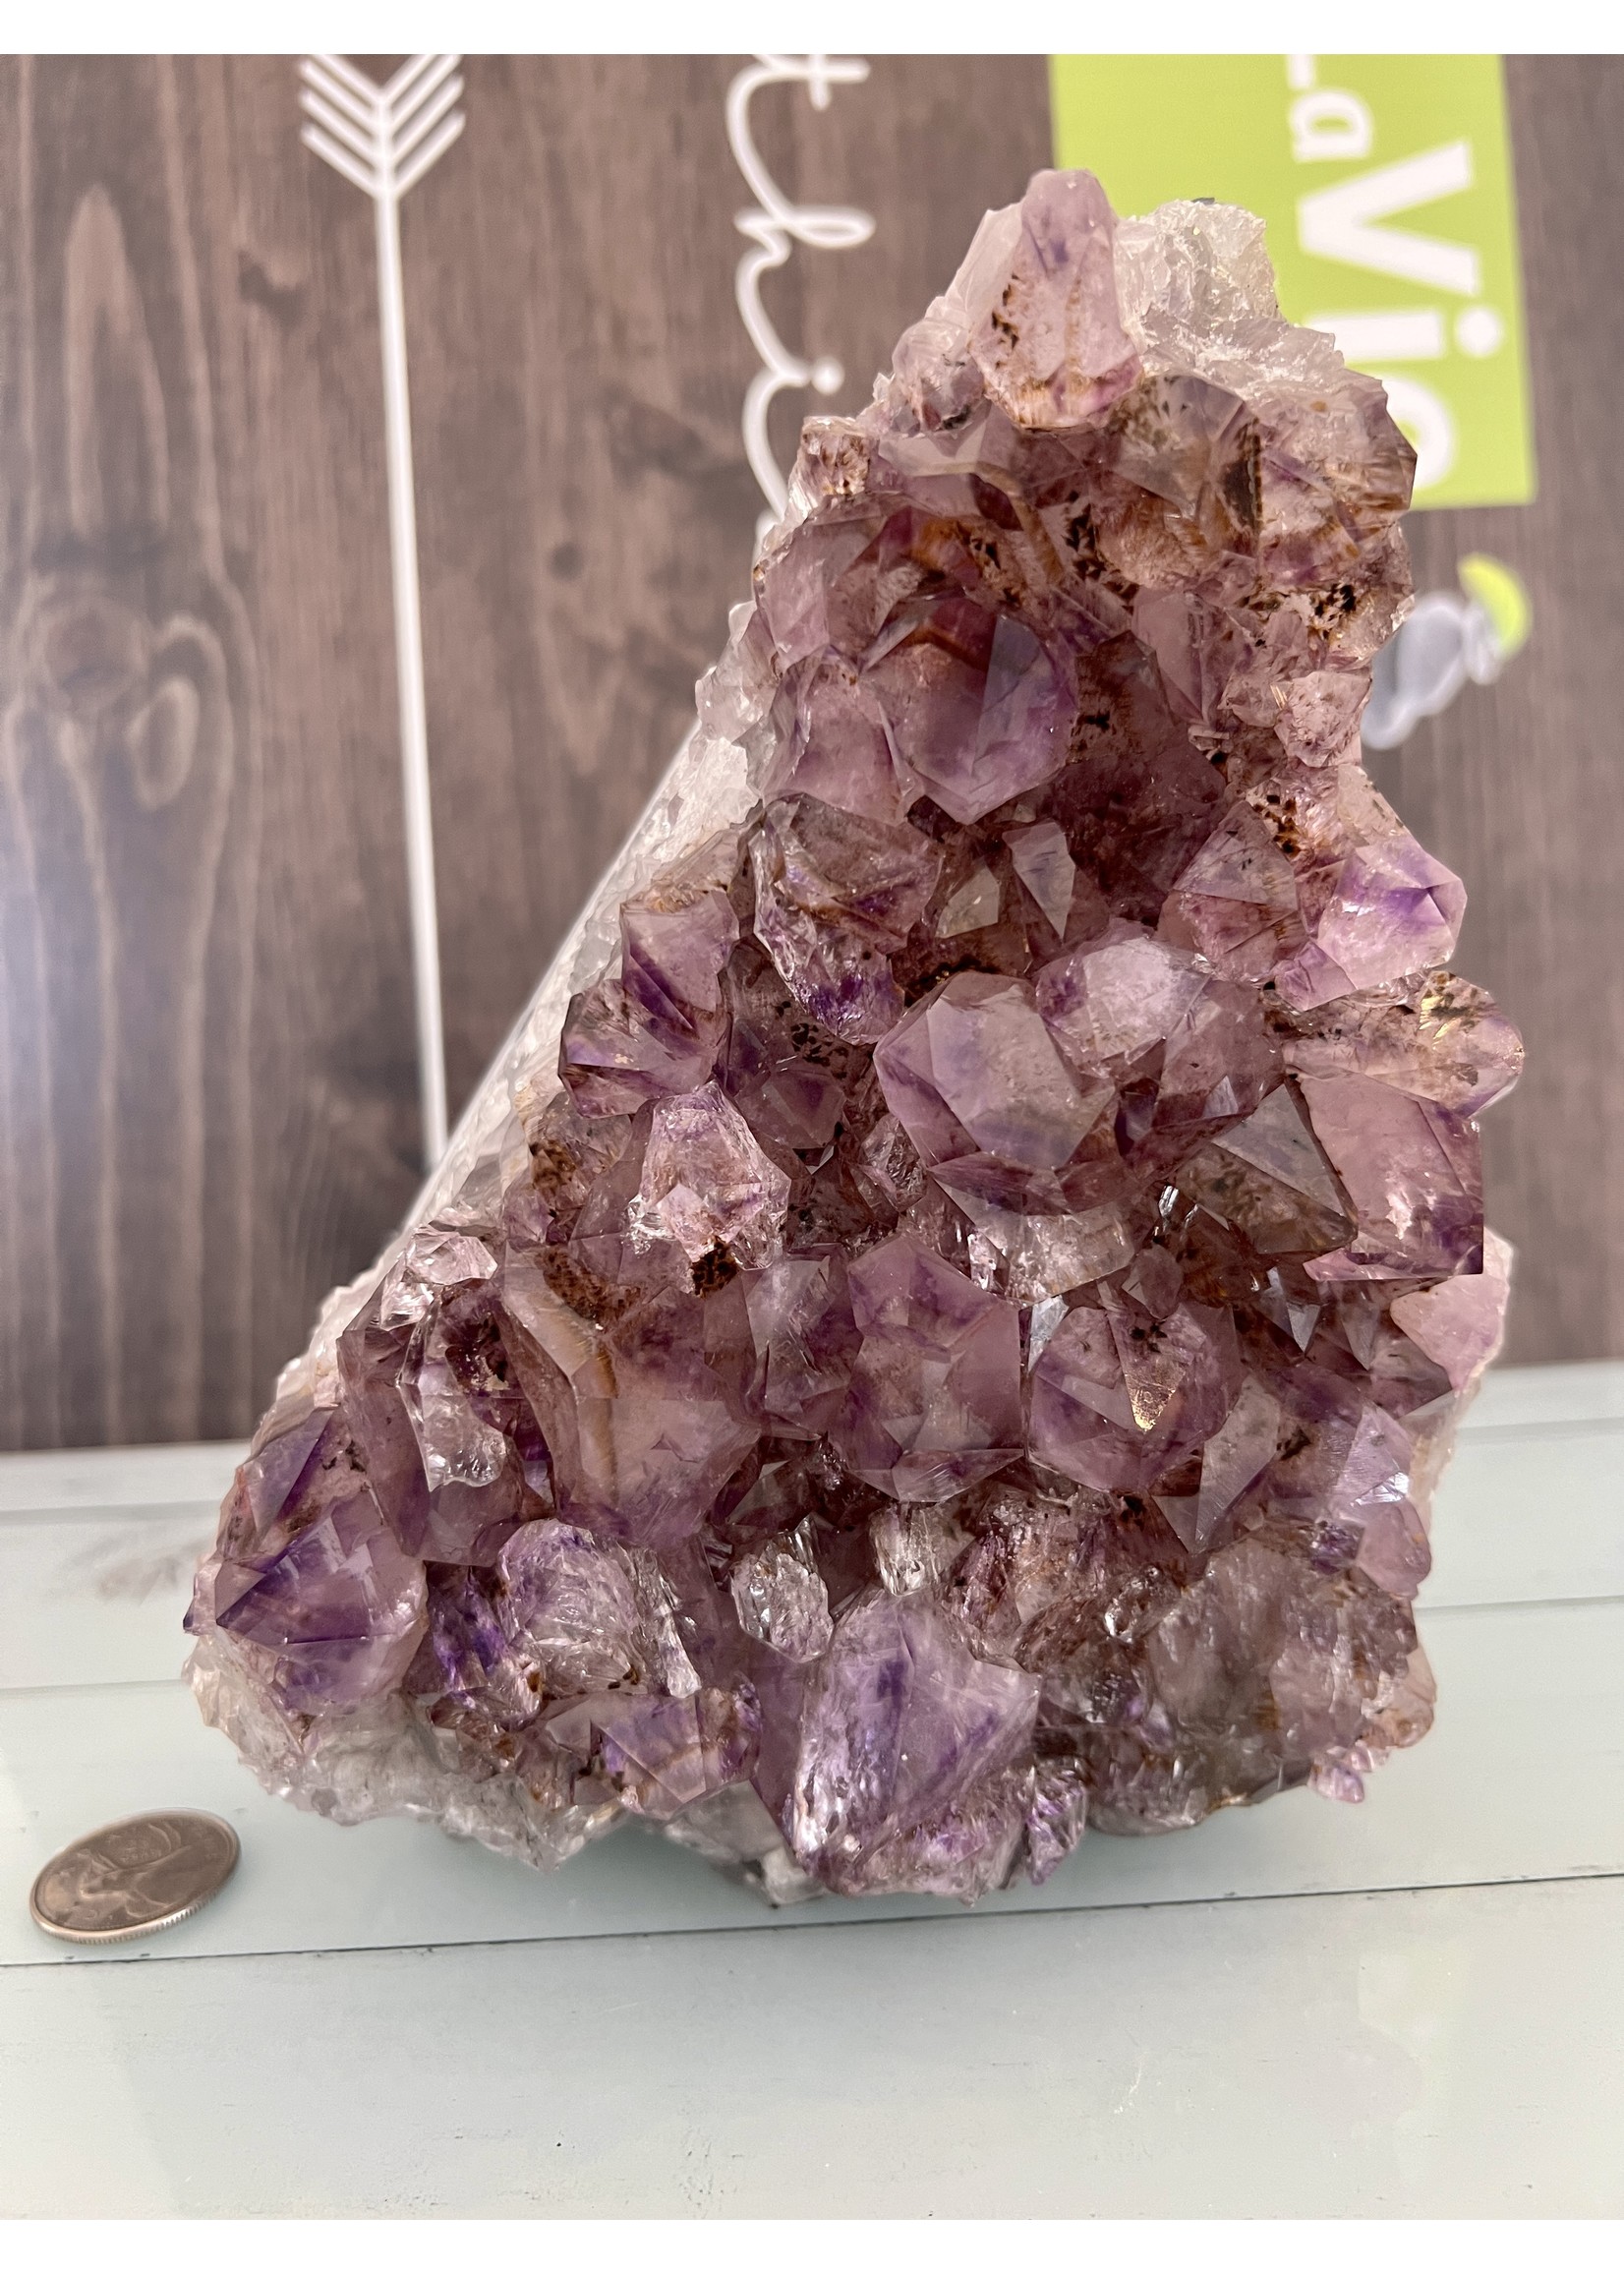 huge amethyst cluster with super seven stone, rough amethyst, amethyst is the stone of wisdom and humility